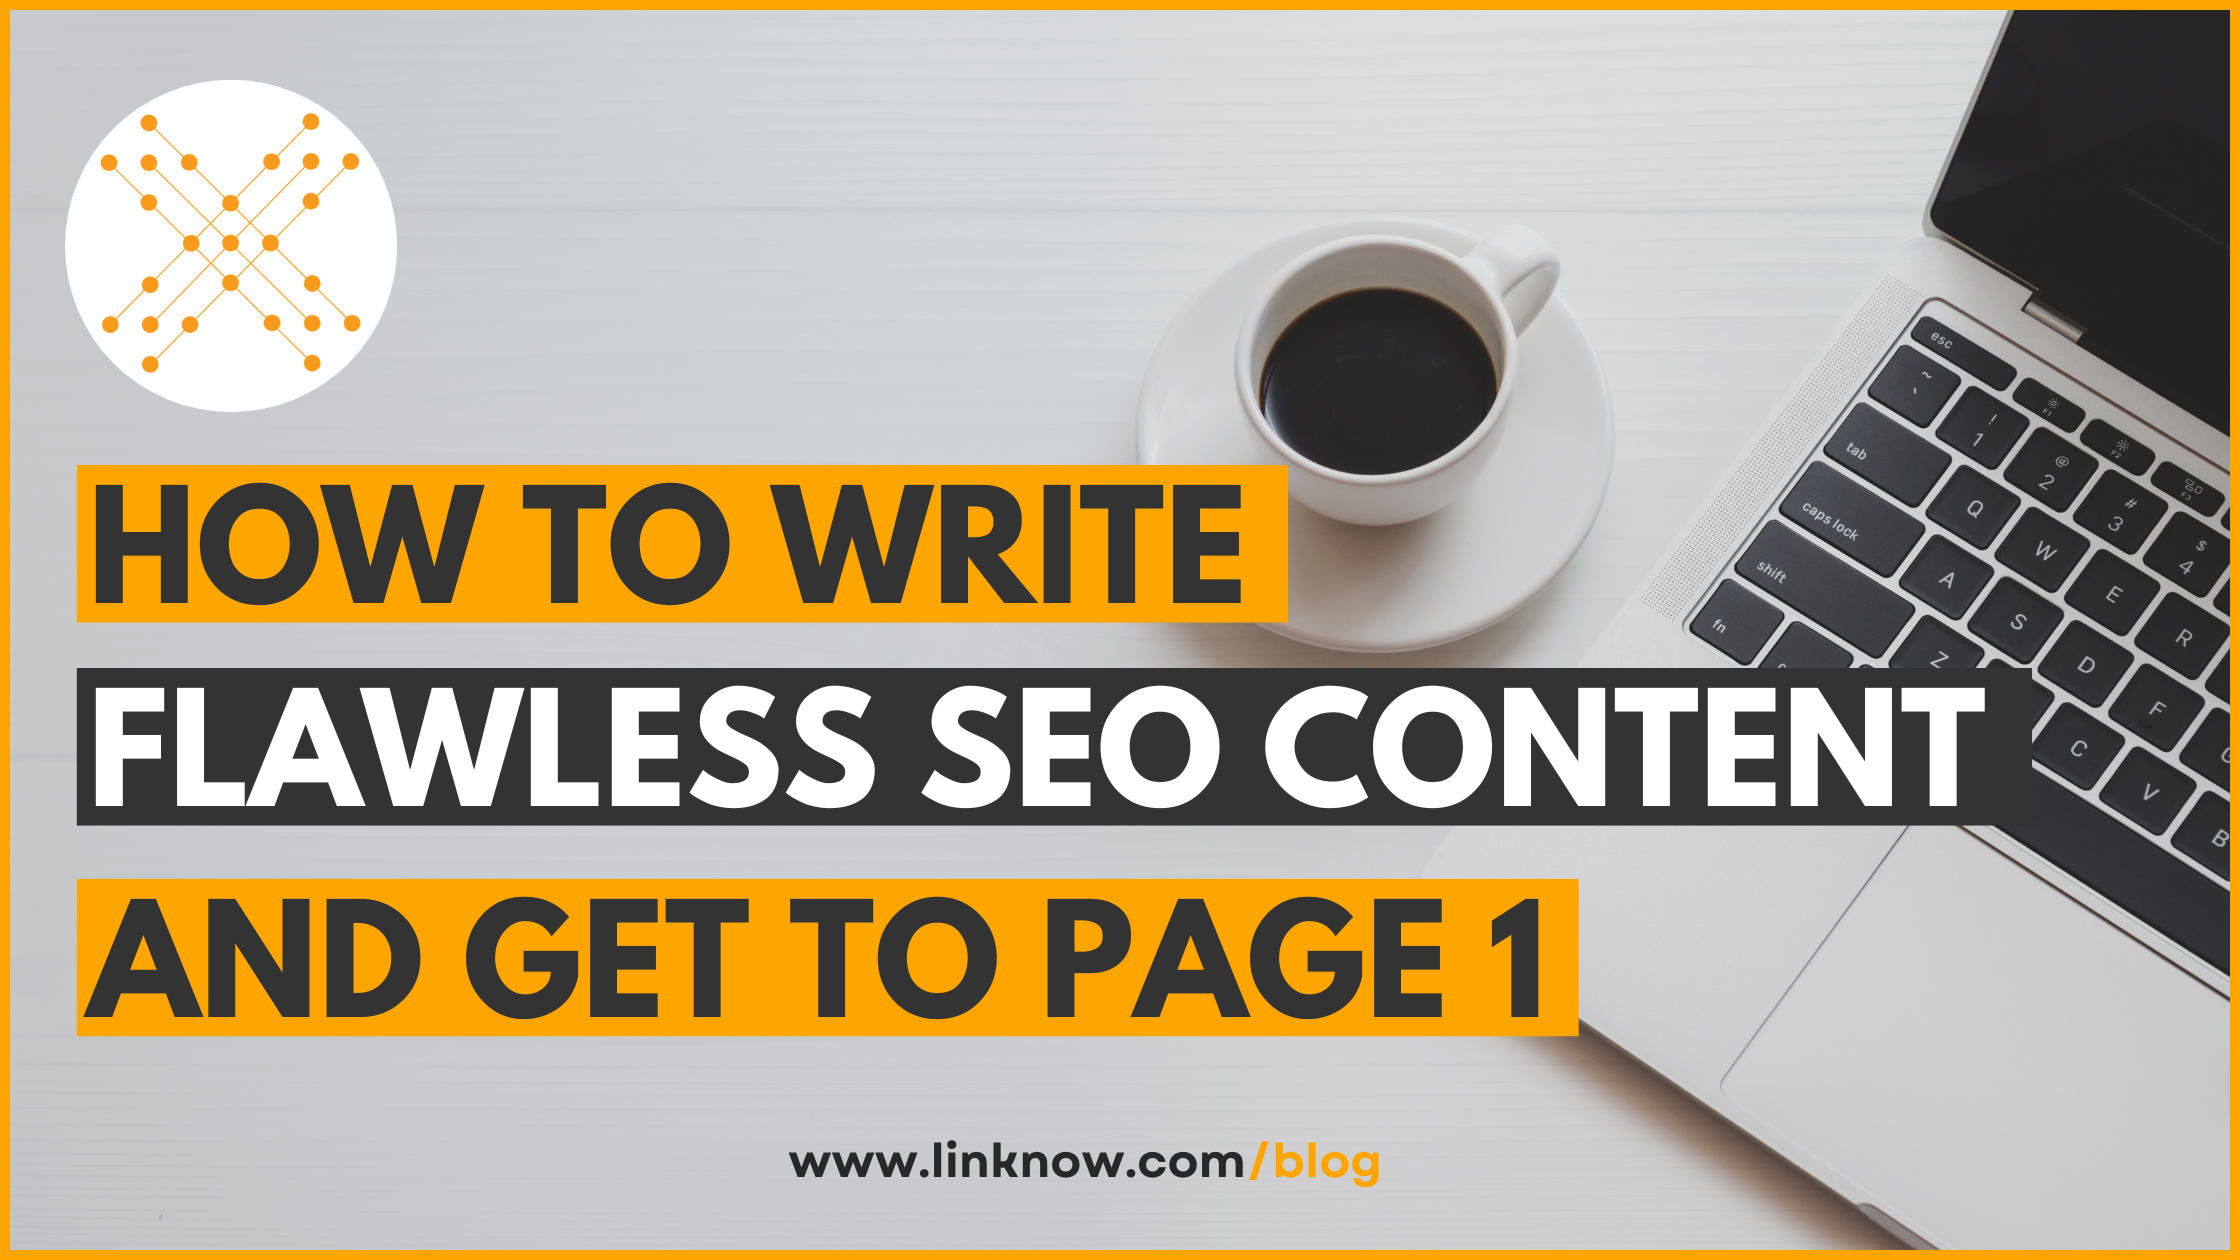 How to Write Flawless SEO Content and Get to Page 1